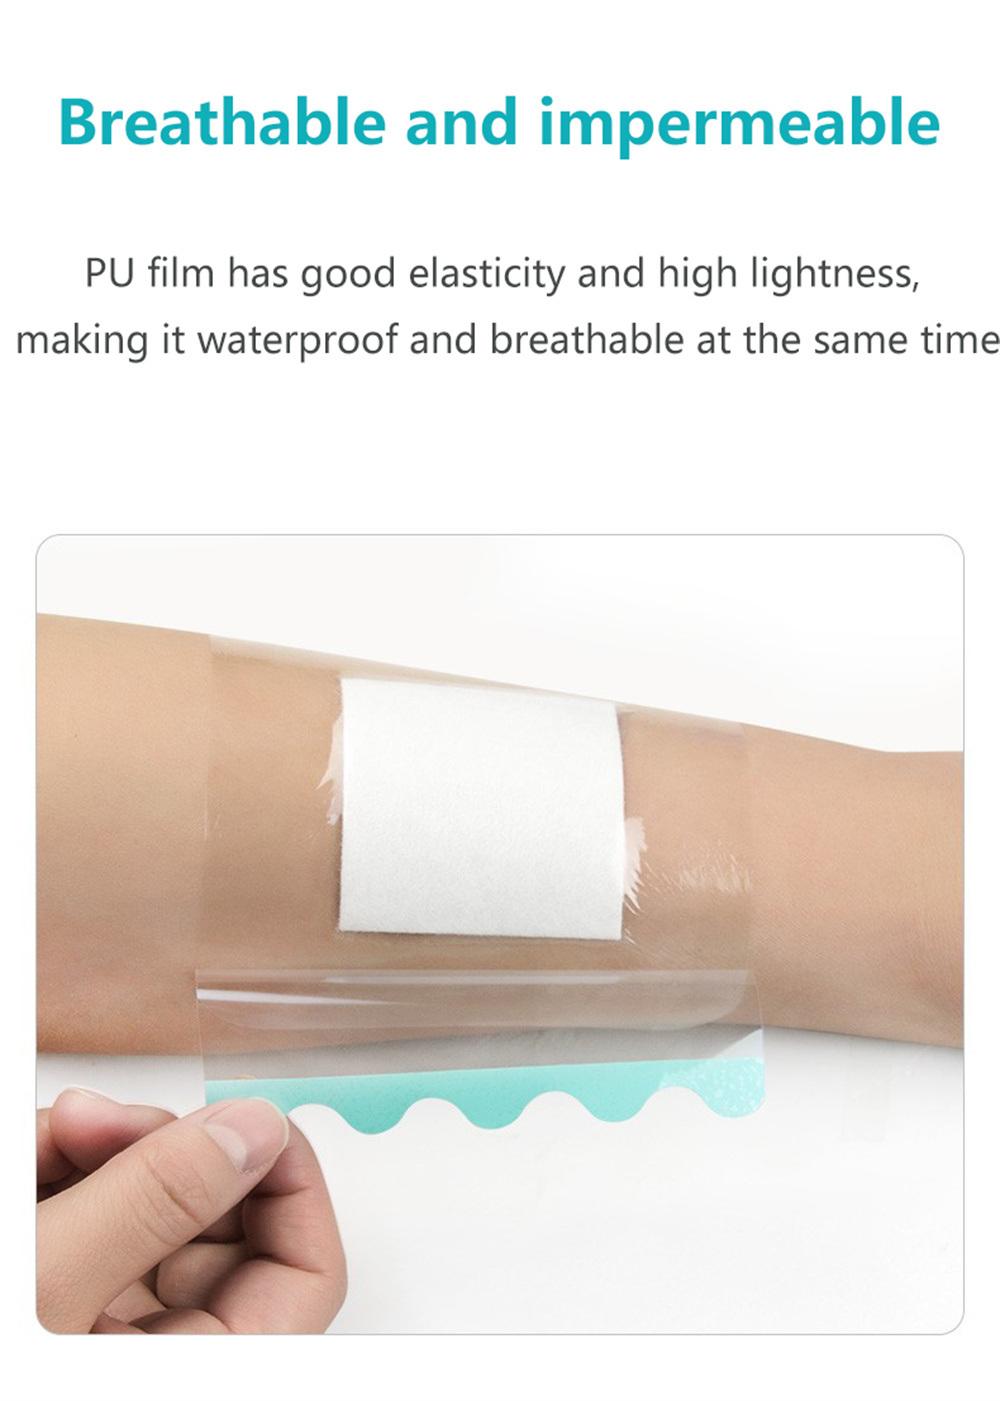 Transparent Film Dressing Waterproof Wound Bandage Adhesive Patches